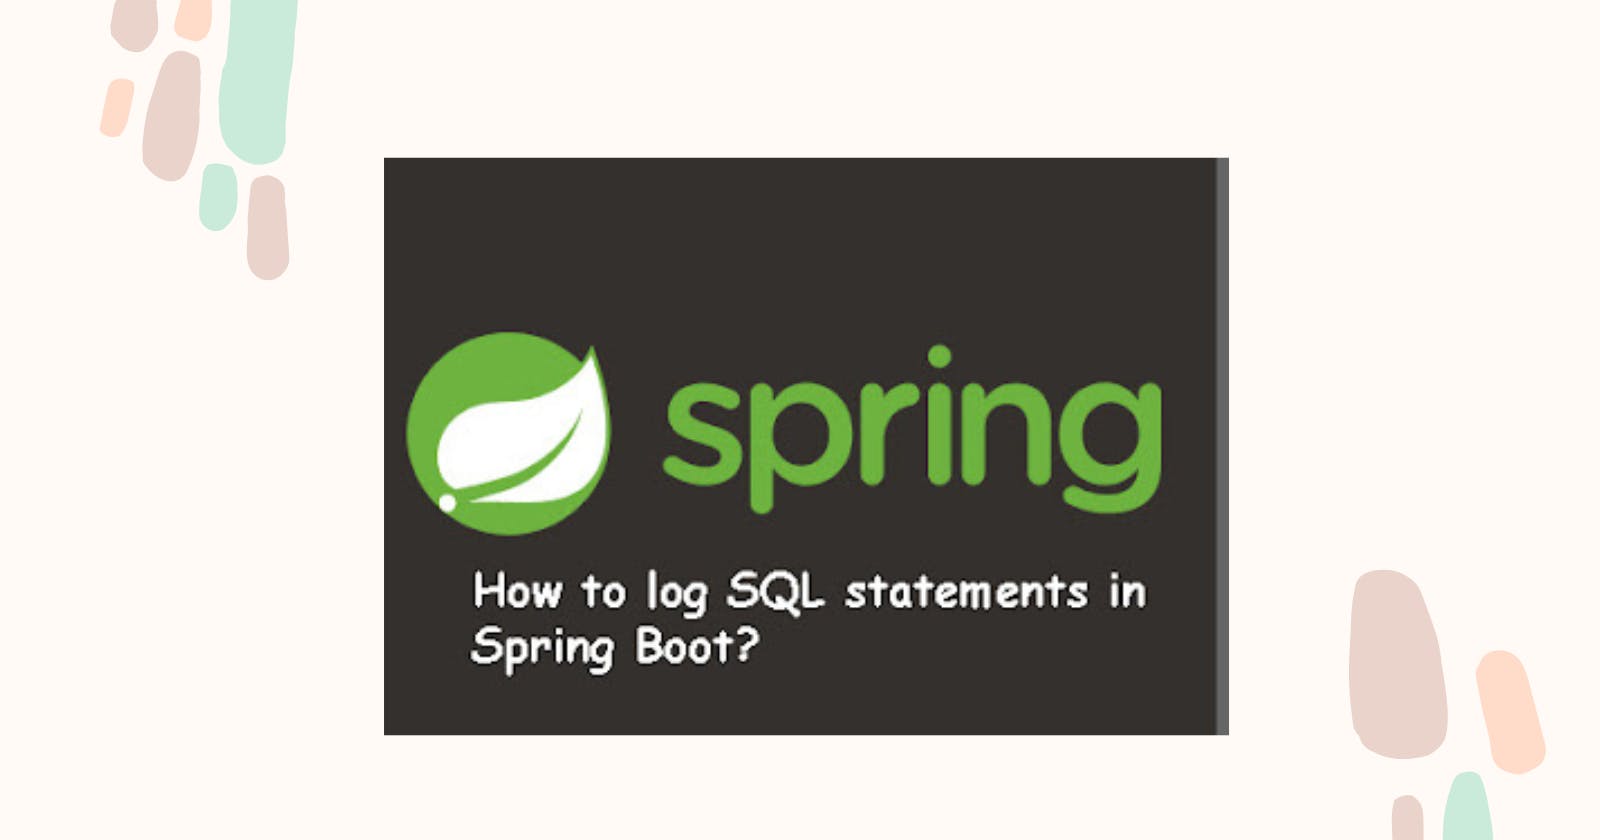 Learn how to enable logging of SQL statements in Spring Boot with this comprehensive tutorial